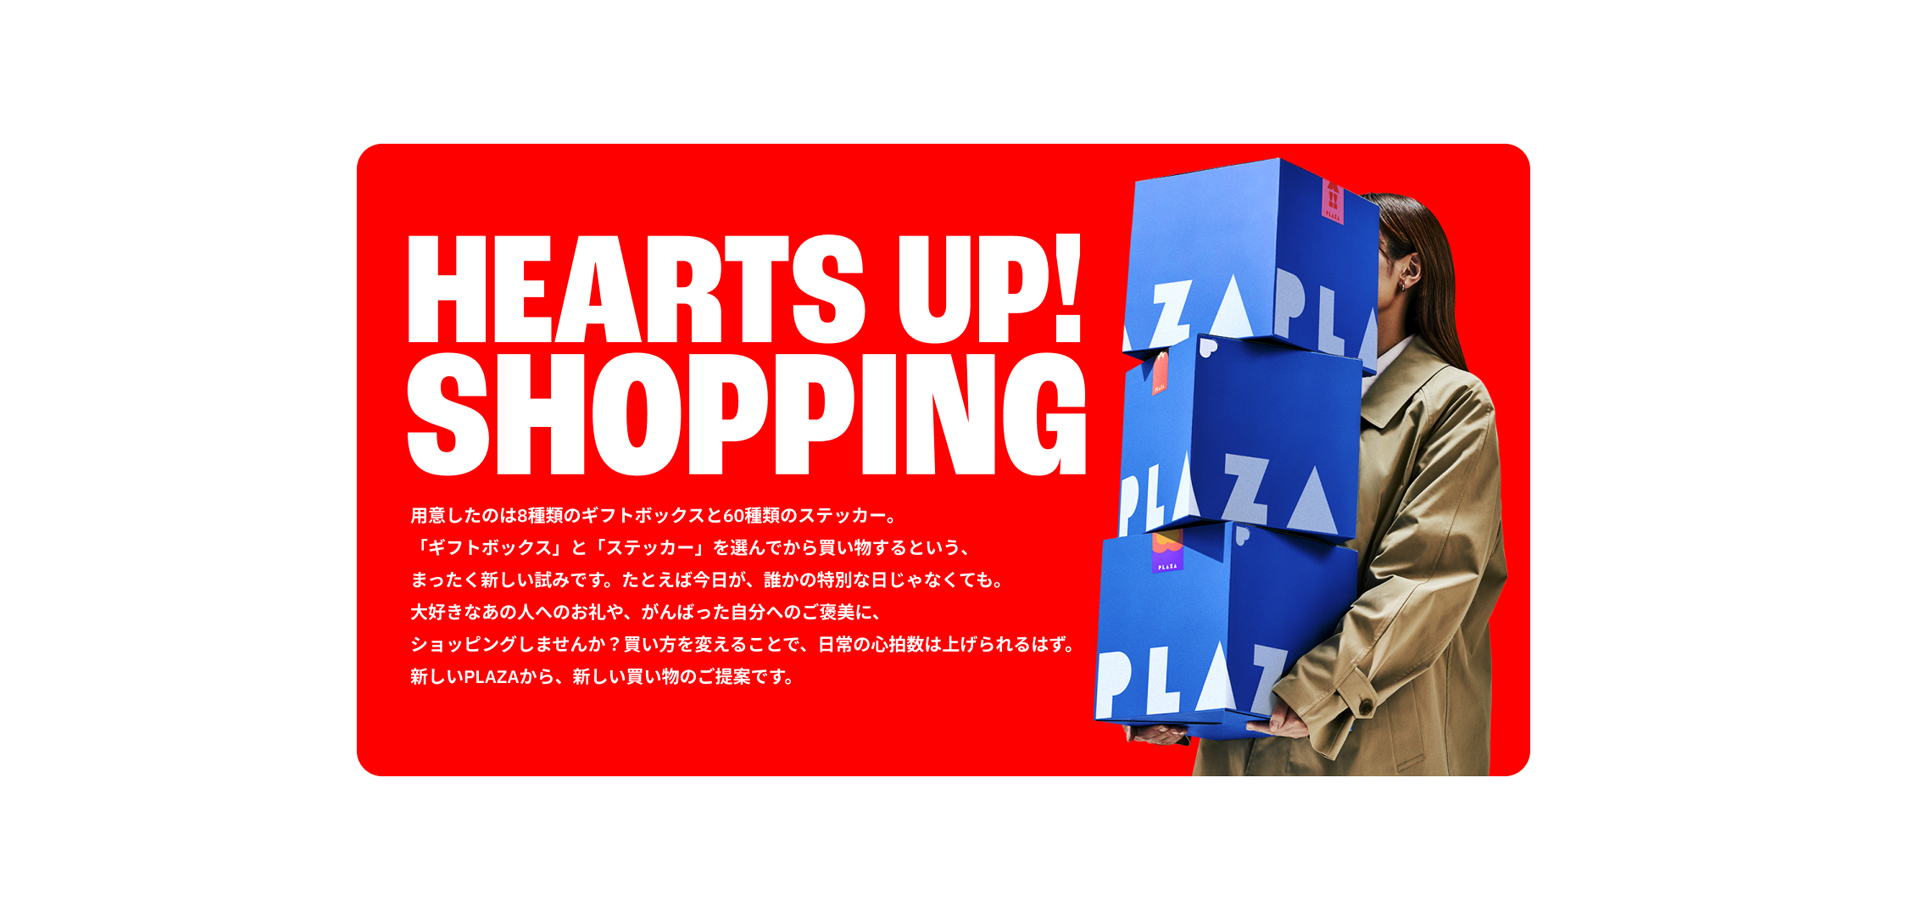 HEARTS UP! SHOPPING PLAZA東京店